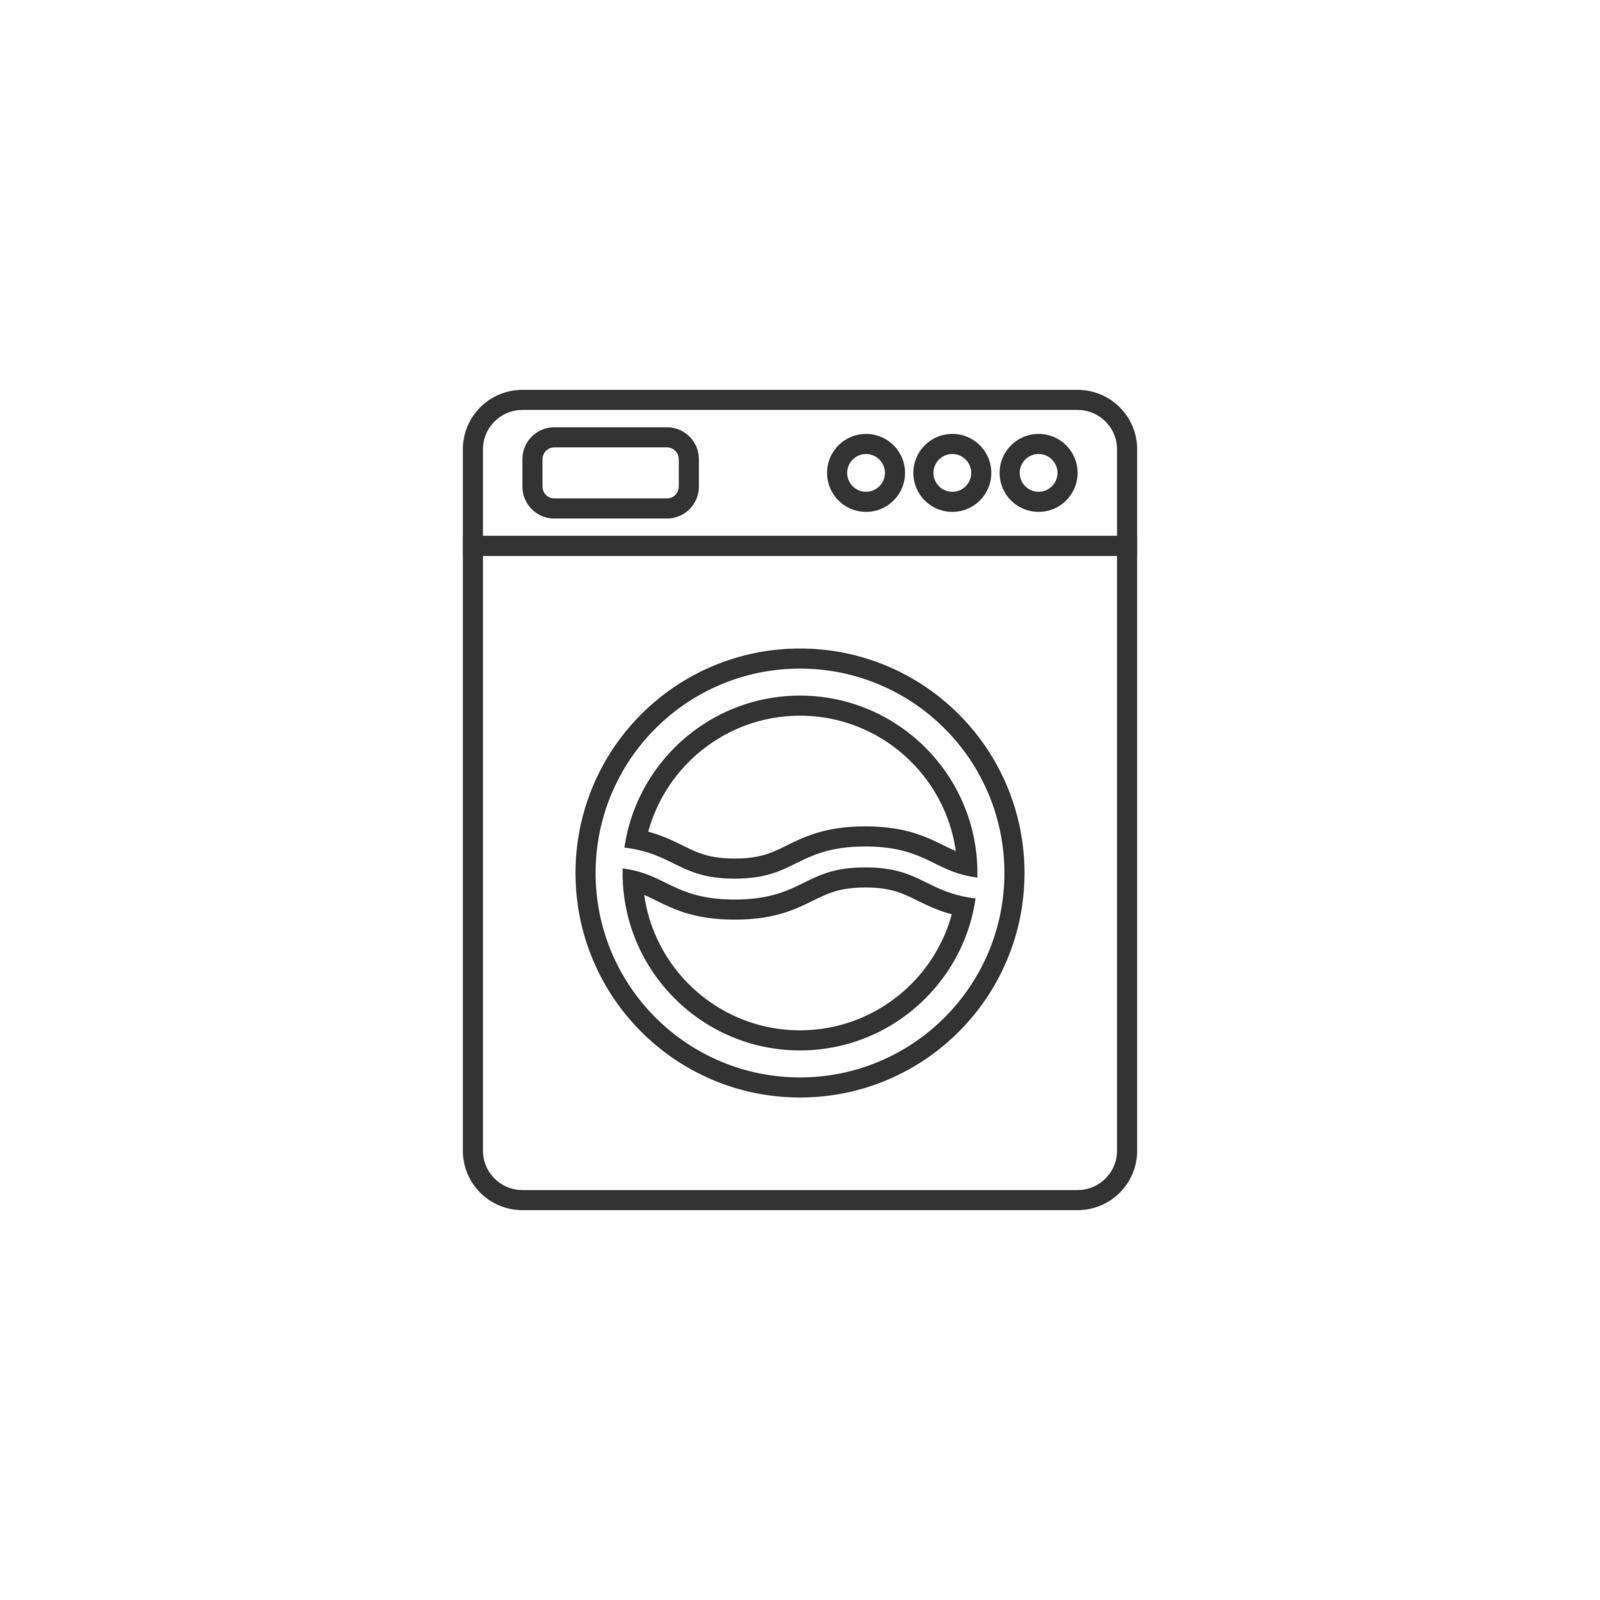 Washing machine icon in flat style. Washer vector illustration on white isolated background. Laundry business concept. by LysenkoA